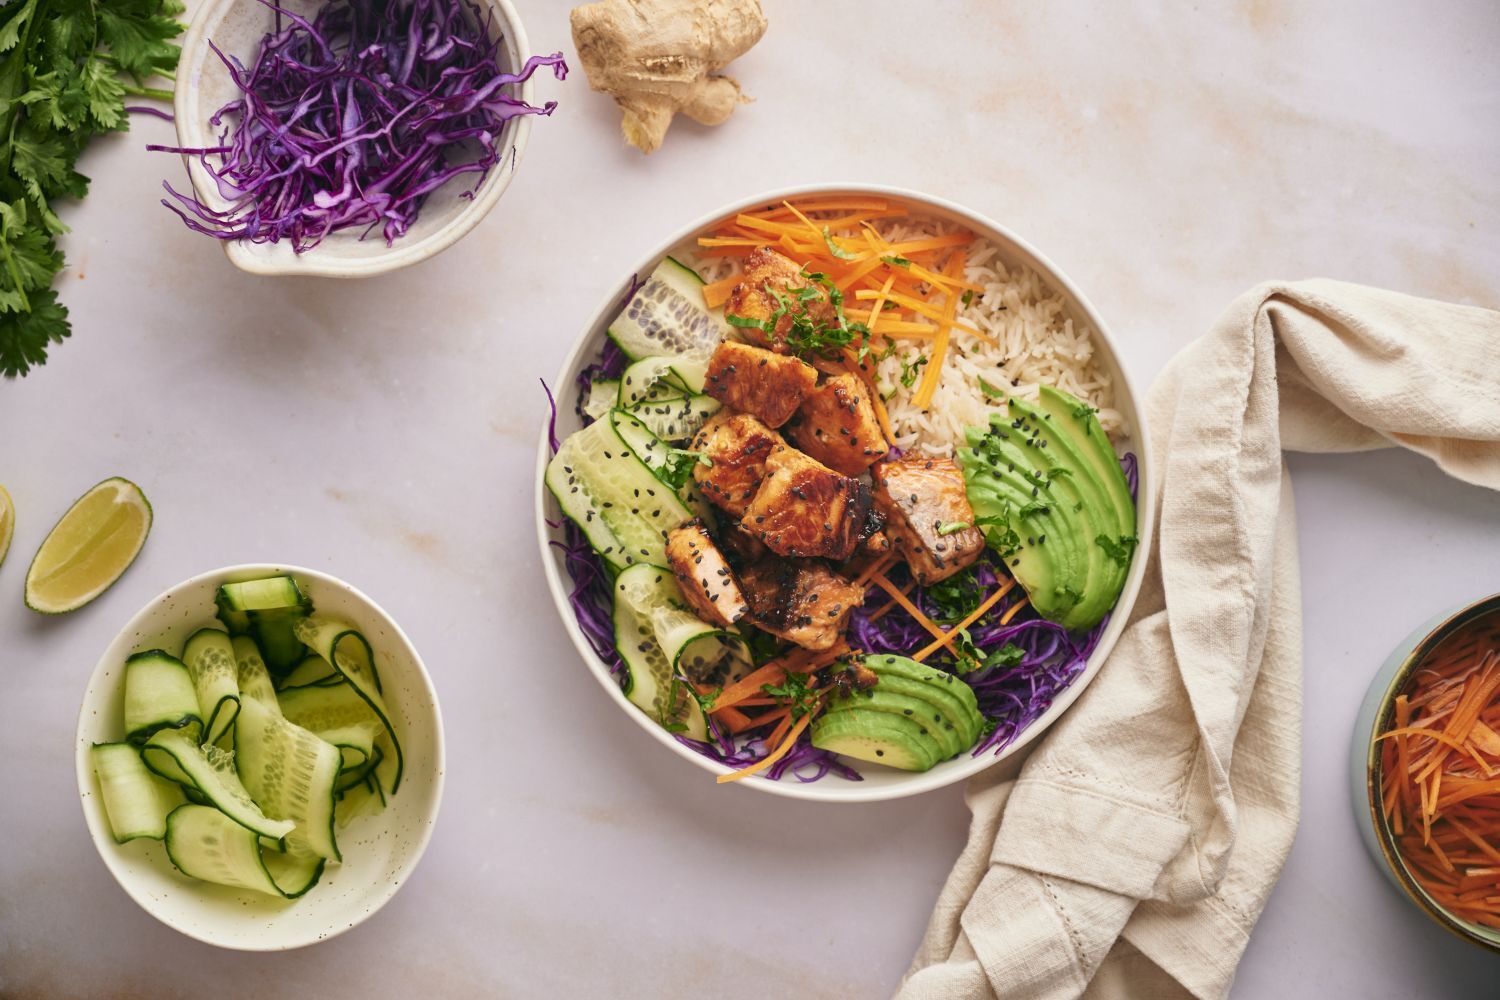 Salmon rice bowls with crispy salmon pieces served with rice, purple cabbage, edamame, carrots, and cucumber.